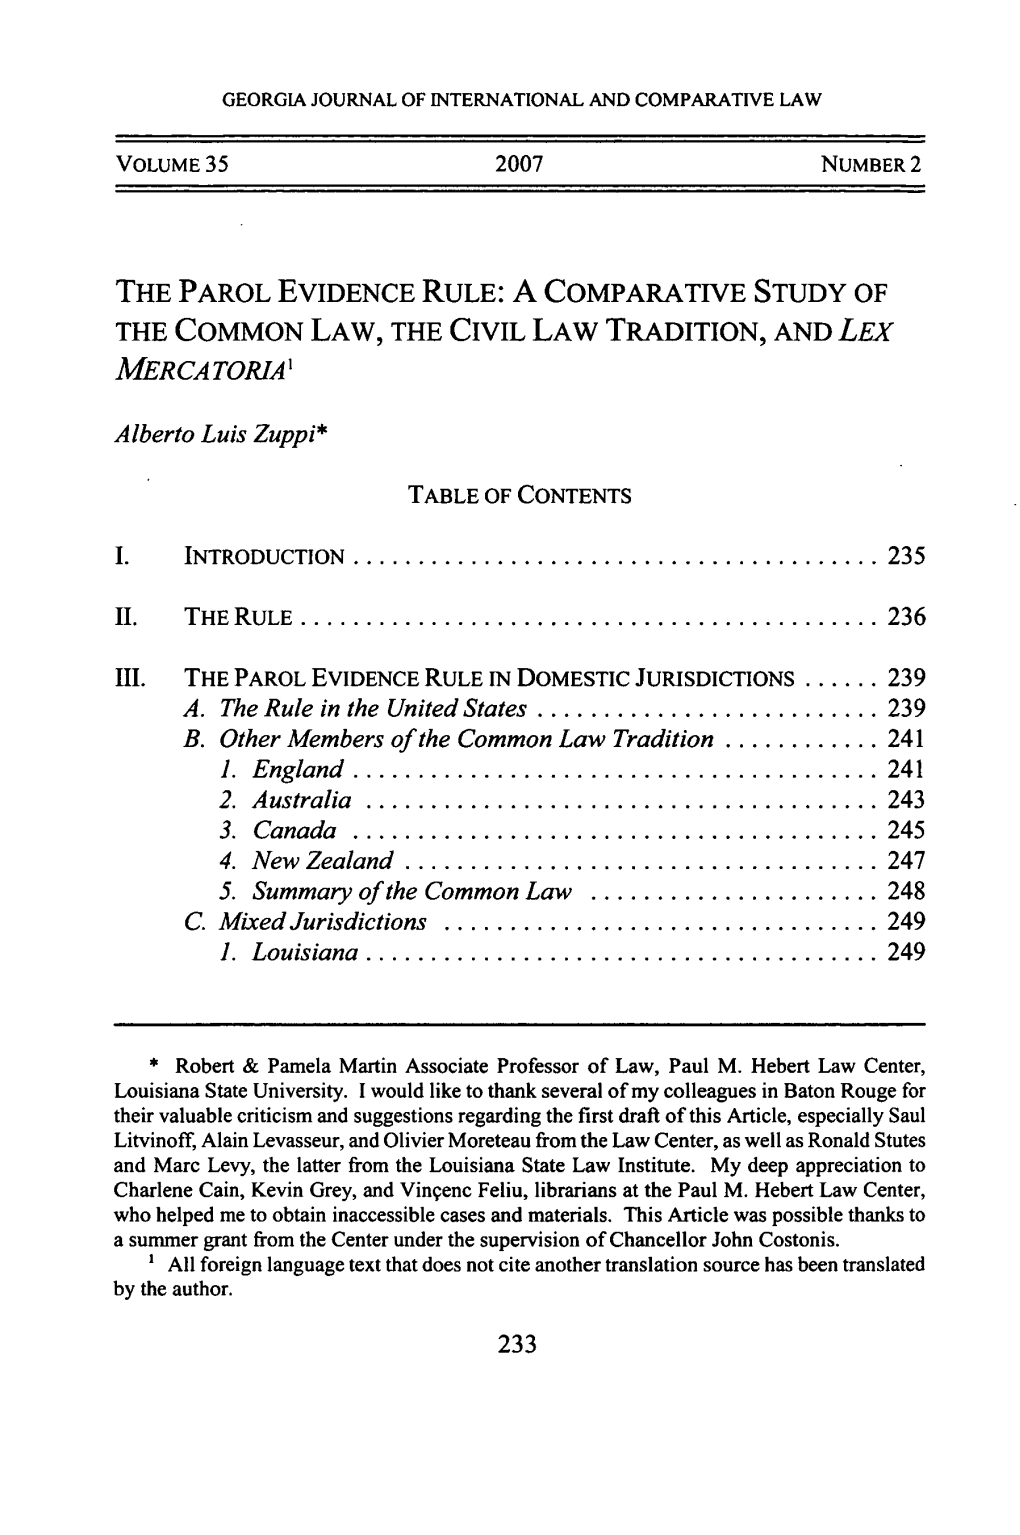 The Parol Evidence Rule: a Comparative Study of the Common Law, the Civil Law Tradition, and Lex Mer Ca Toria1